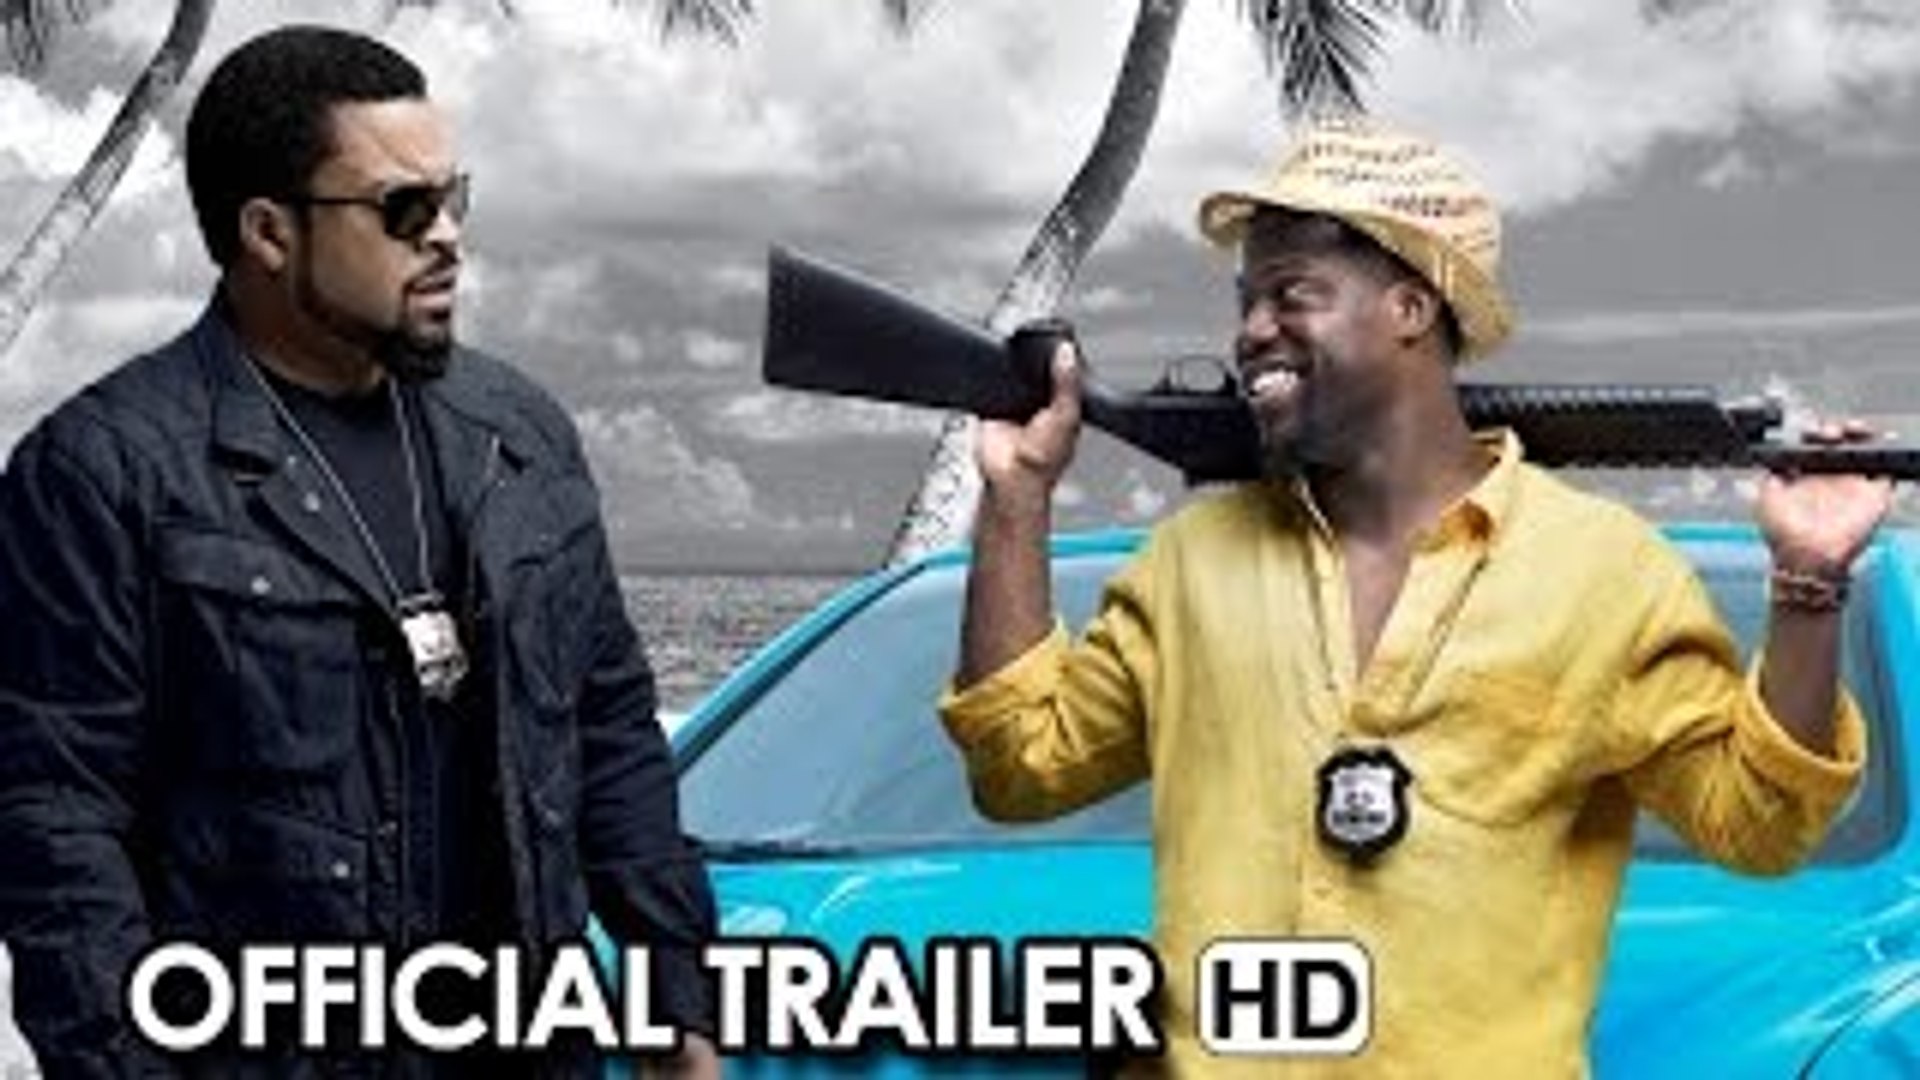 Ride Along 2 Official Trailer (2016) - Kevin Hart, Ice Cube HD